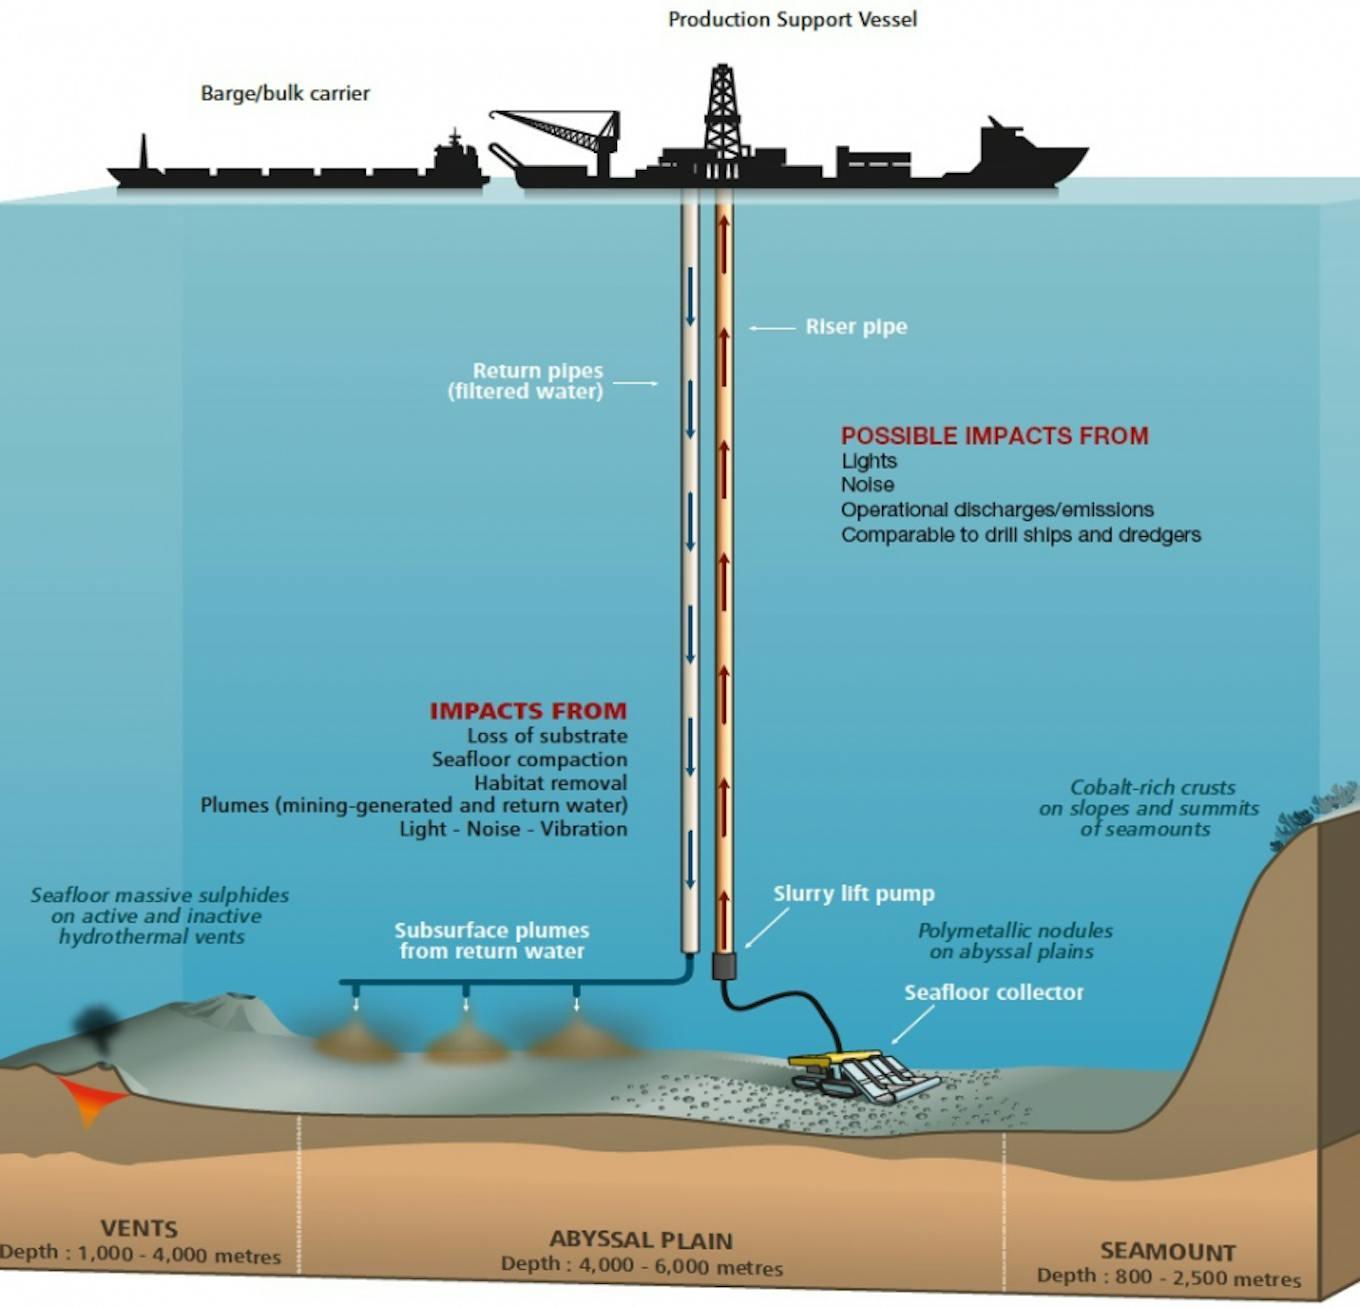 Possible impacts from deep-sea mining